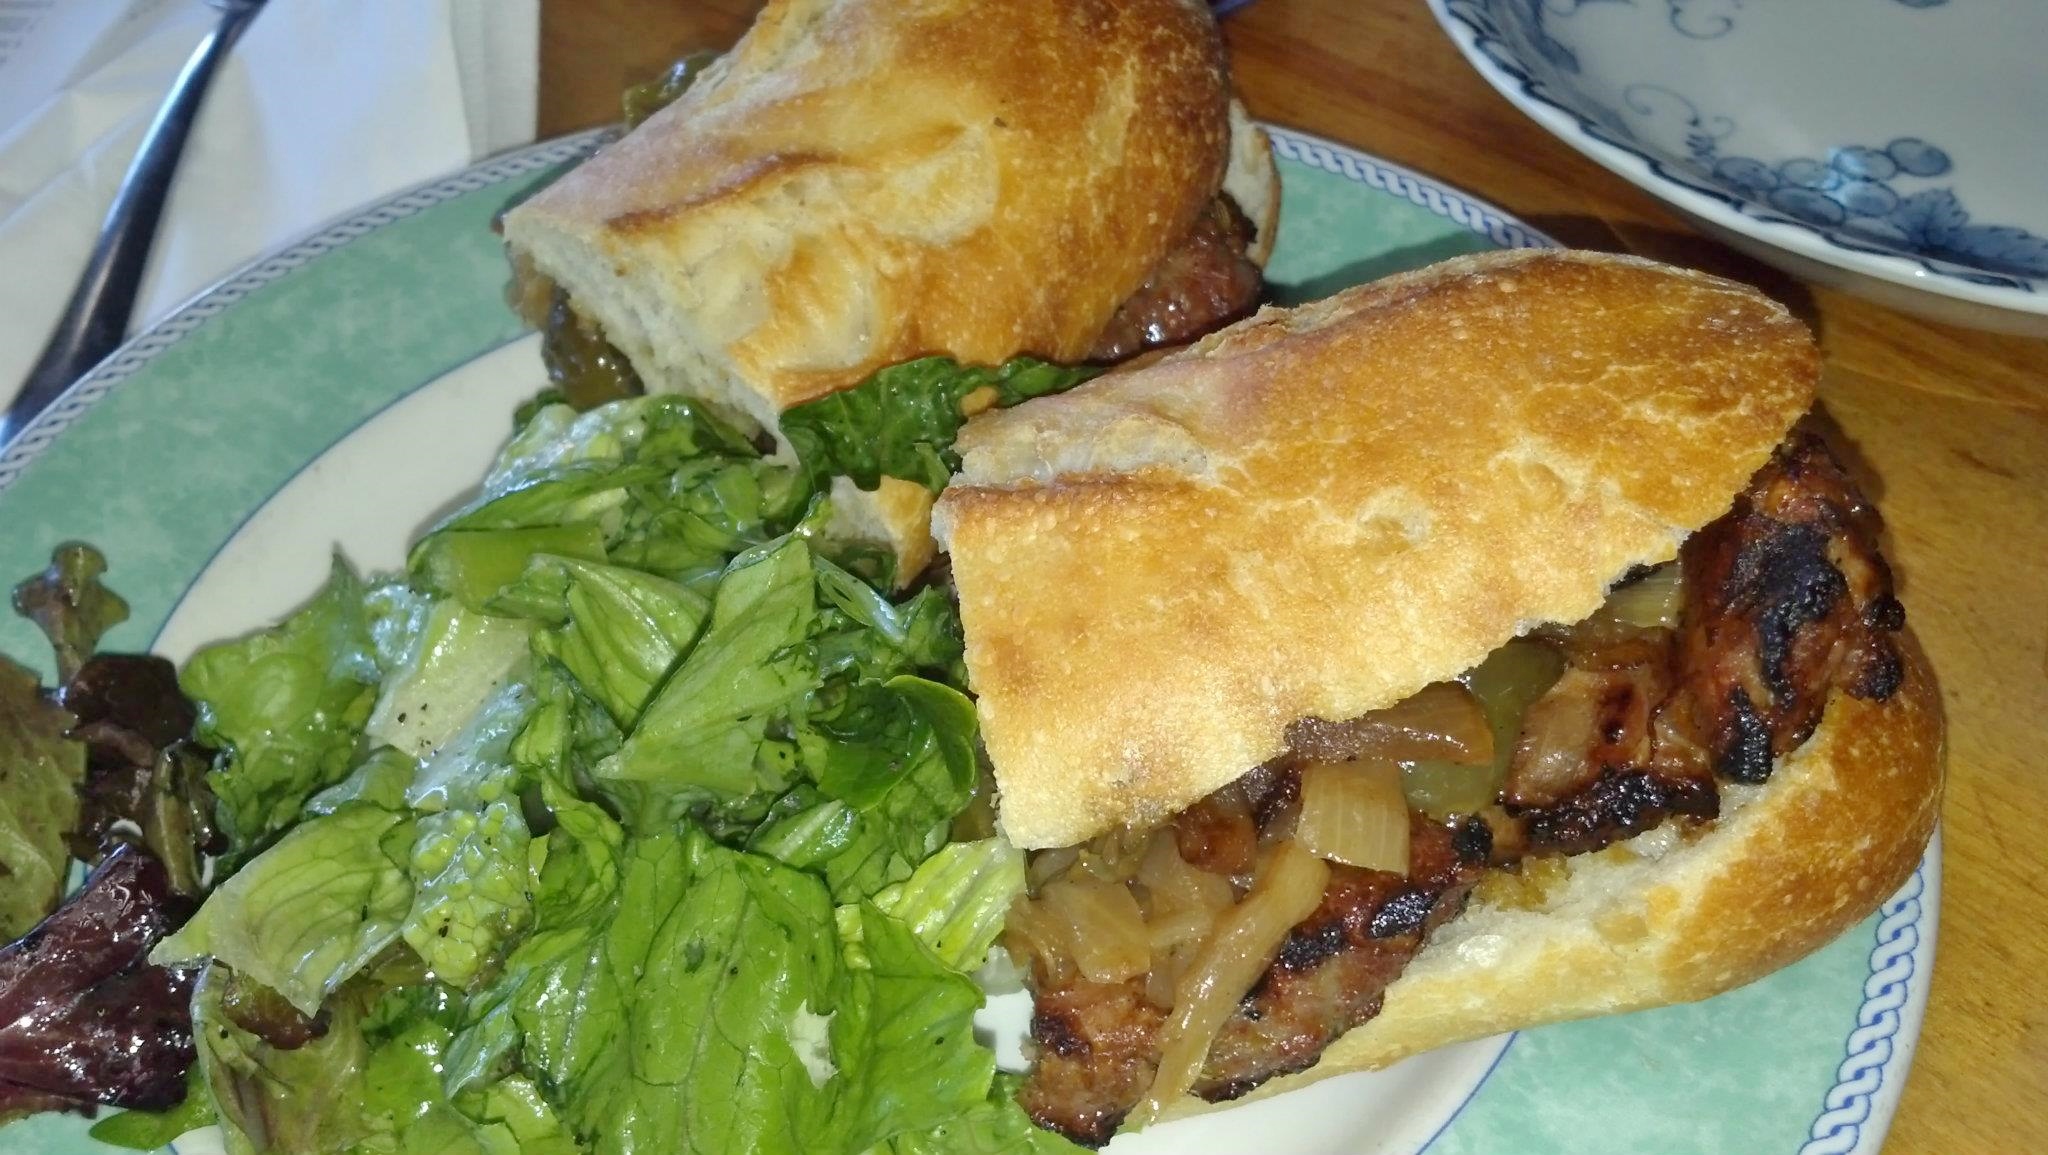 Tizio sandwich (homemade sausage with peppers and onions)